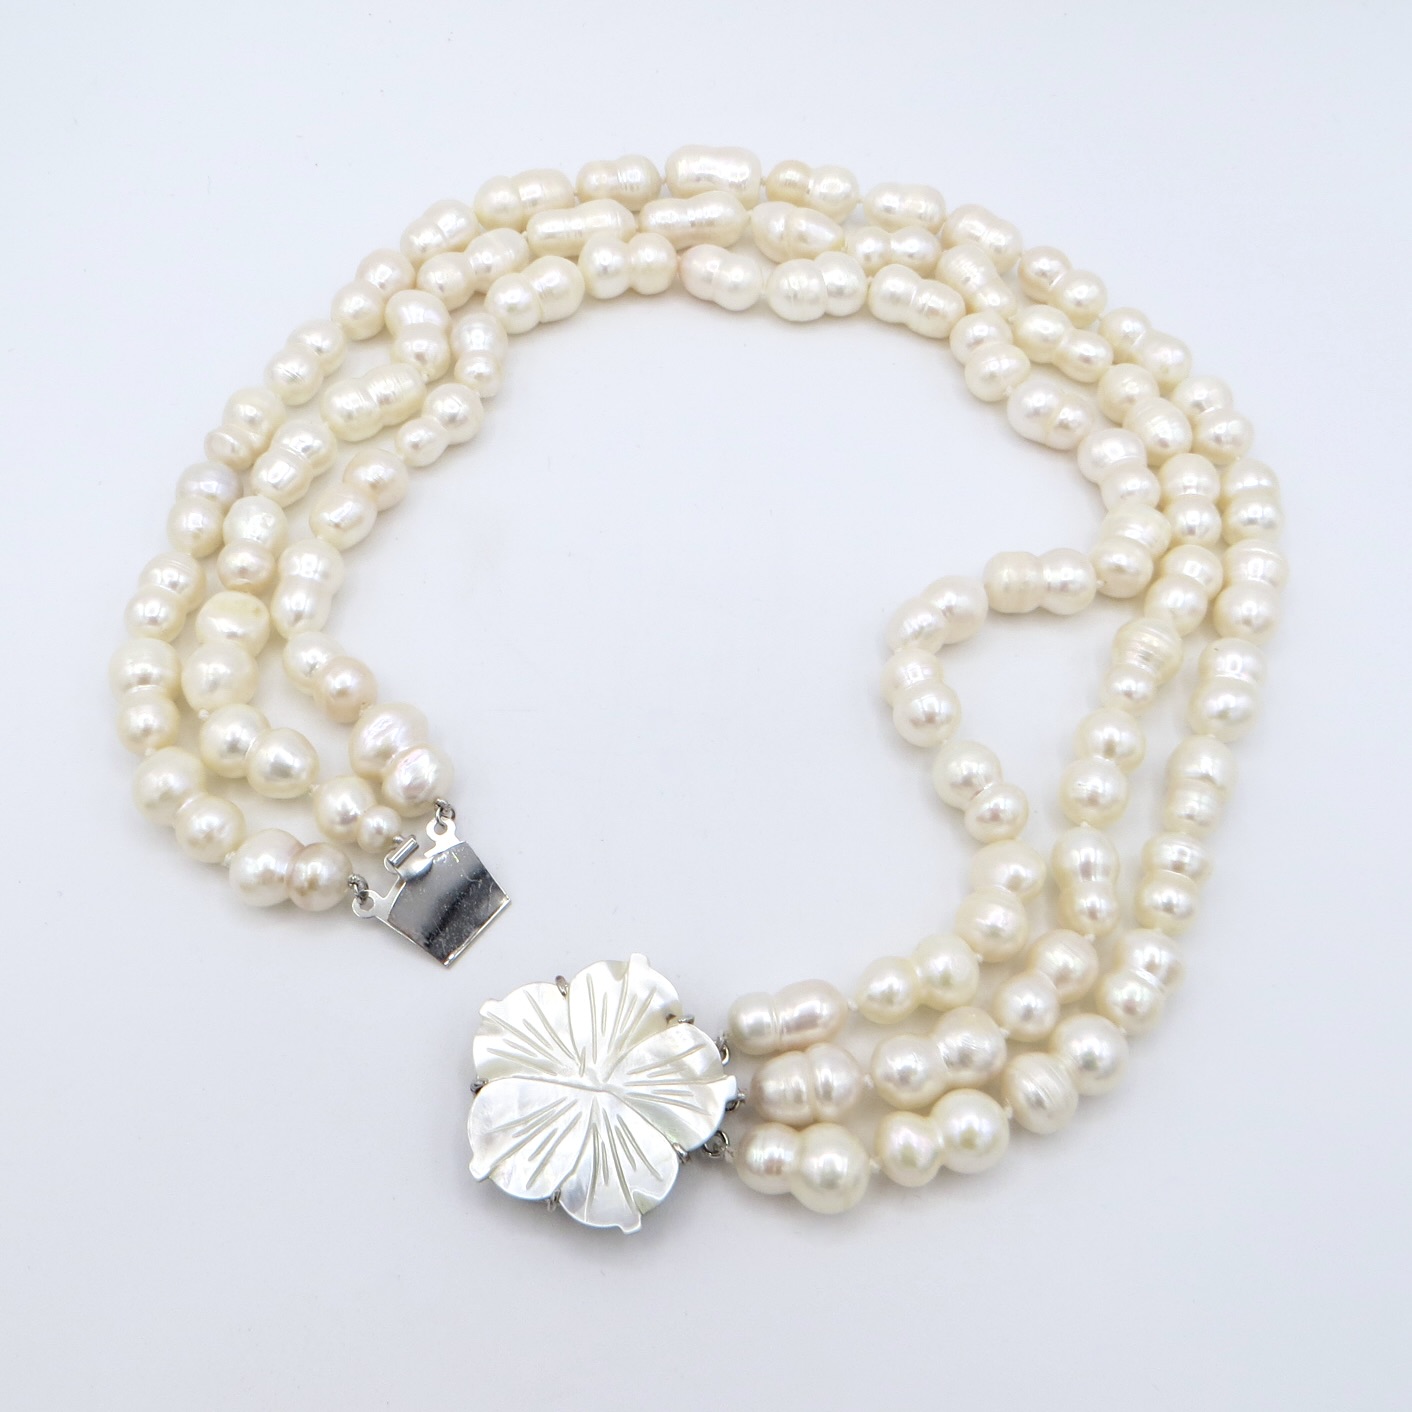 Baroque Pearl Necklace with Floral Clasp